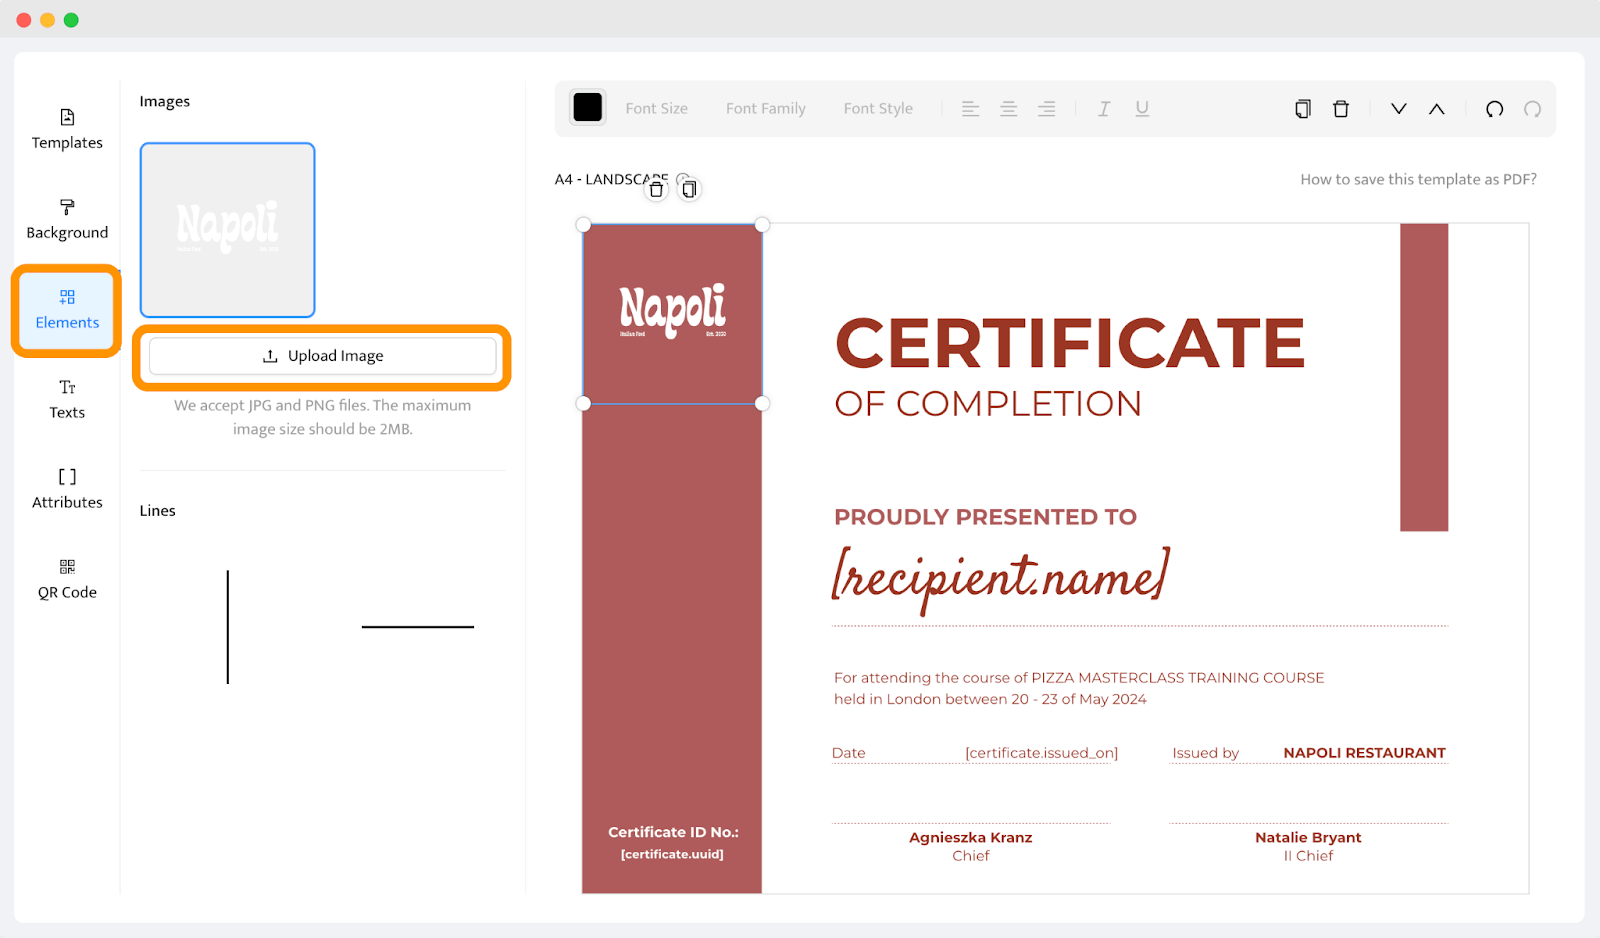 Uploading an image to the Certifier editor to upload the company’s logo.